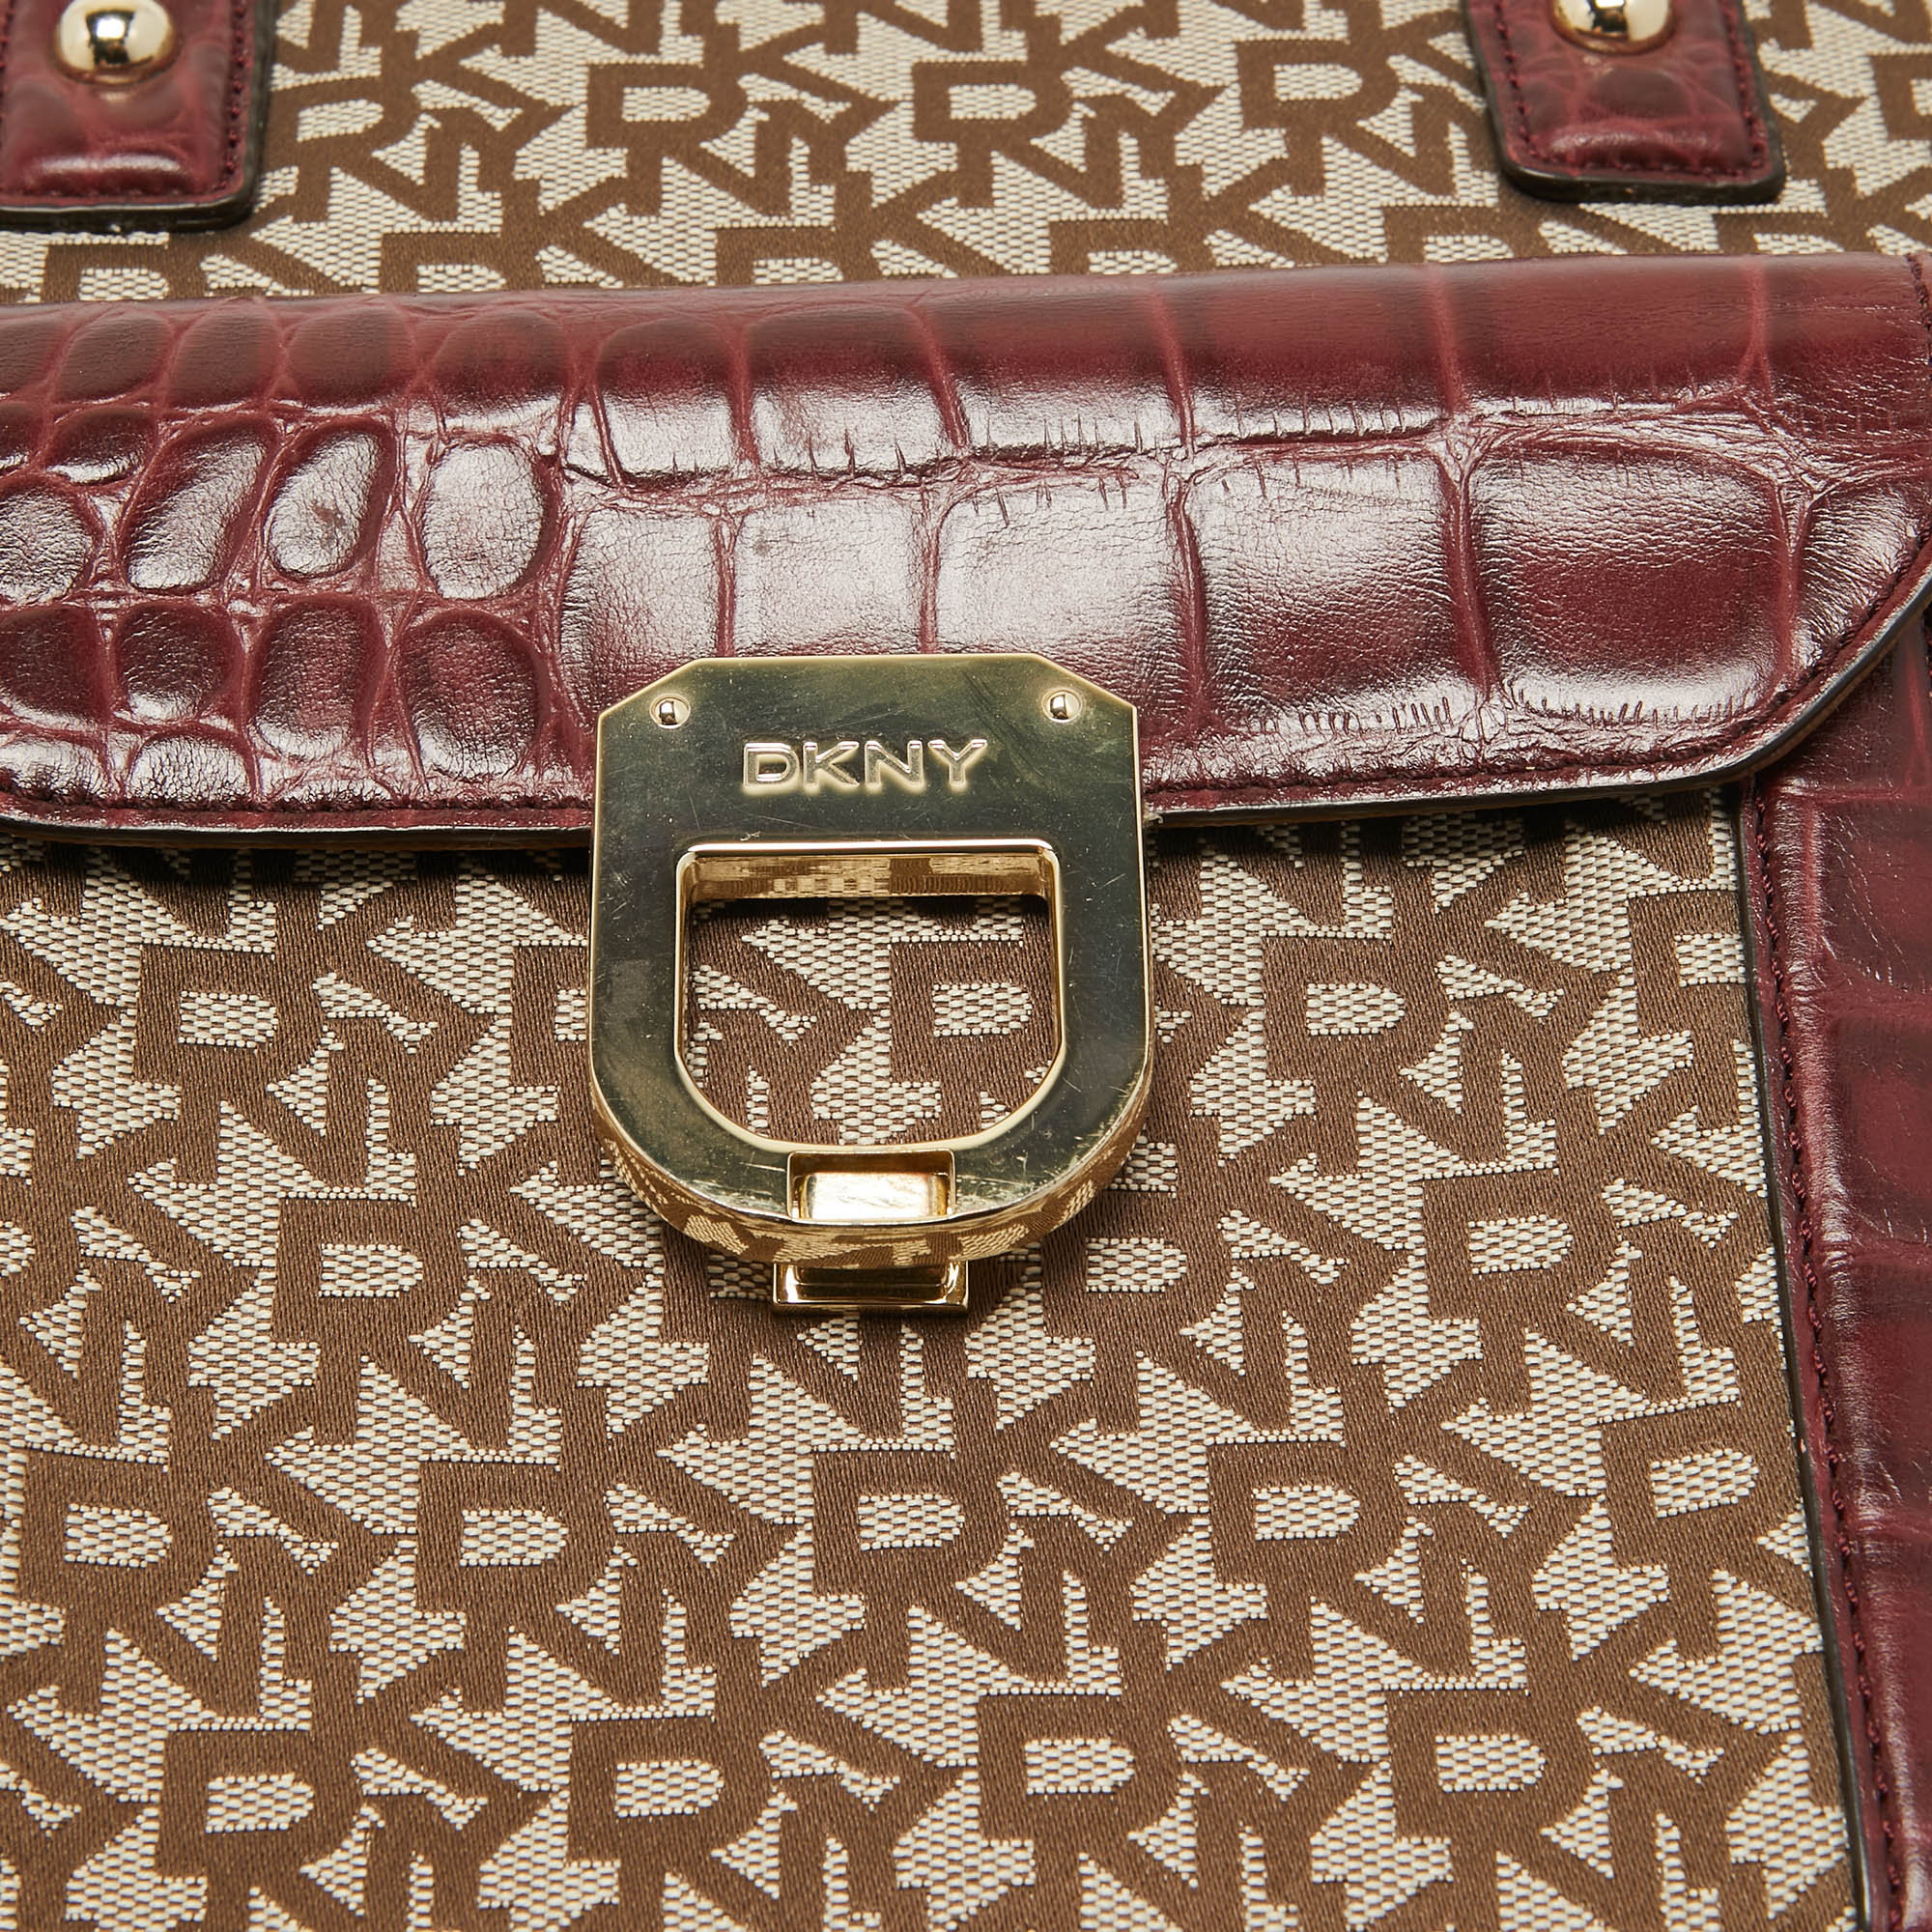 DKNY Dark Red/Beige Signature Canvas And Croc Embossed Leather Tote